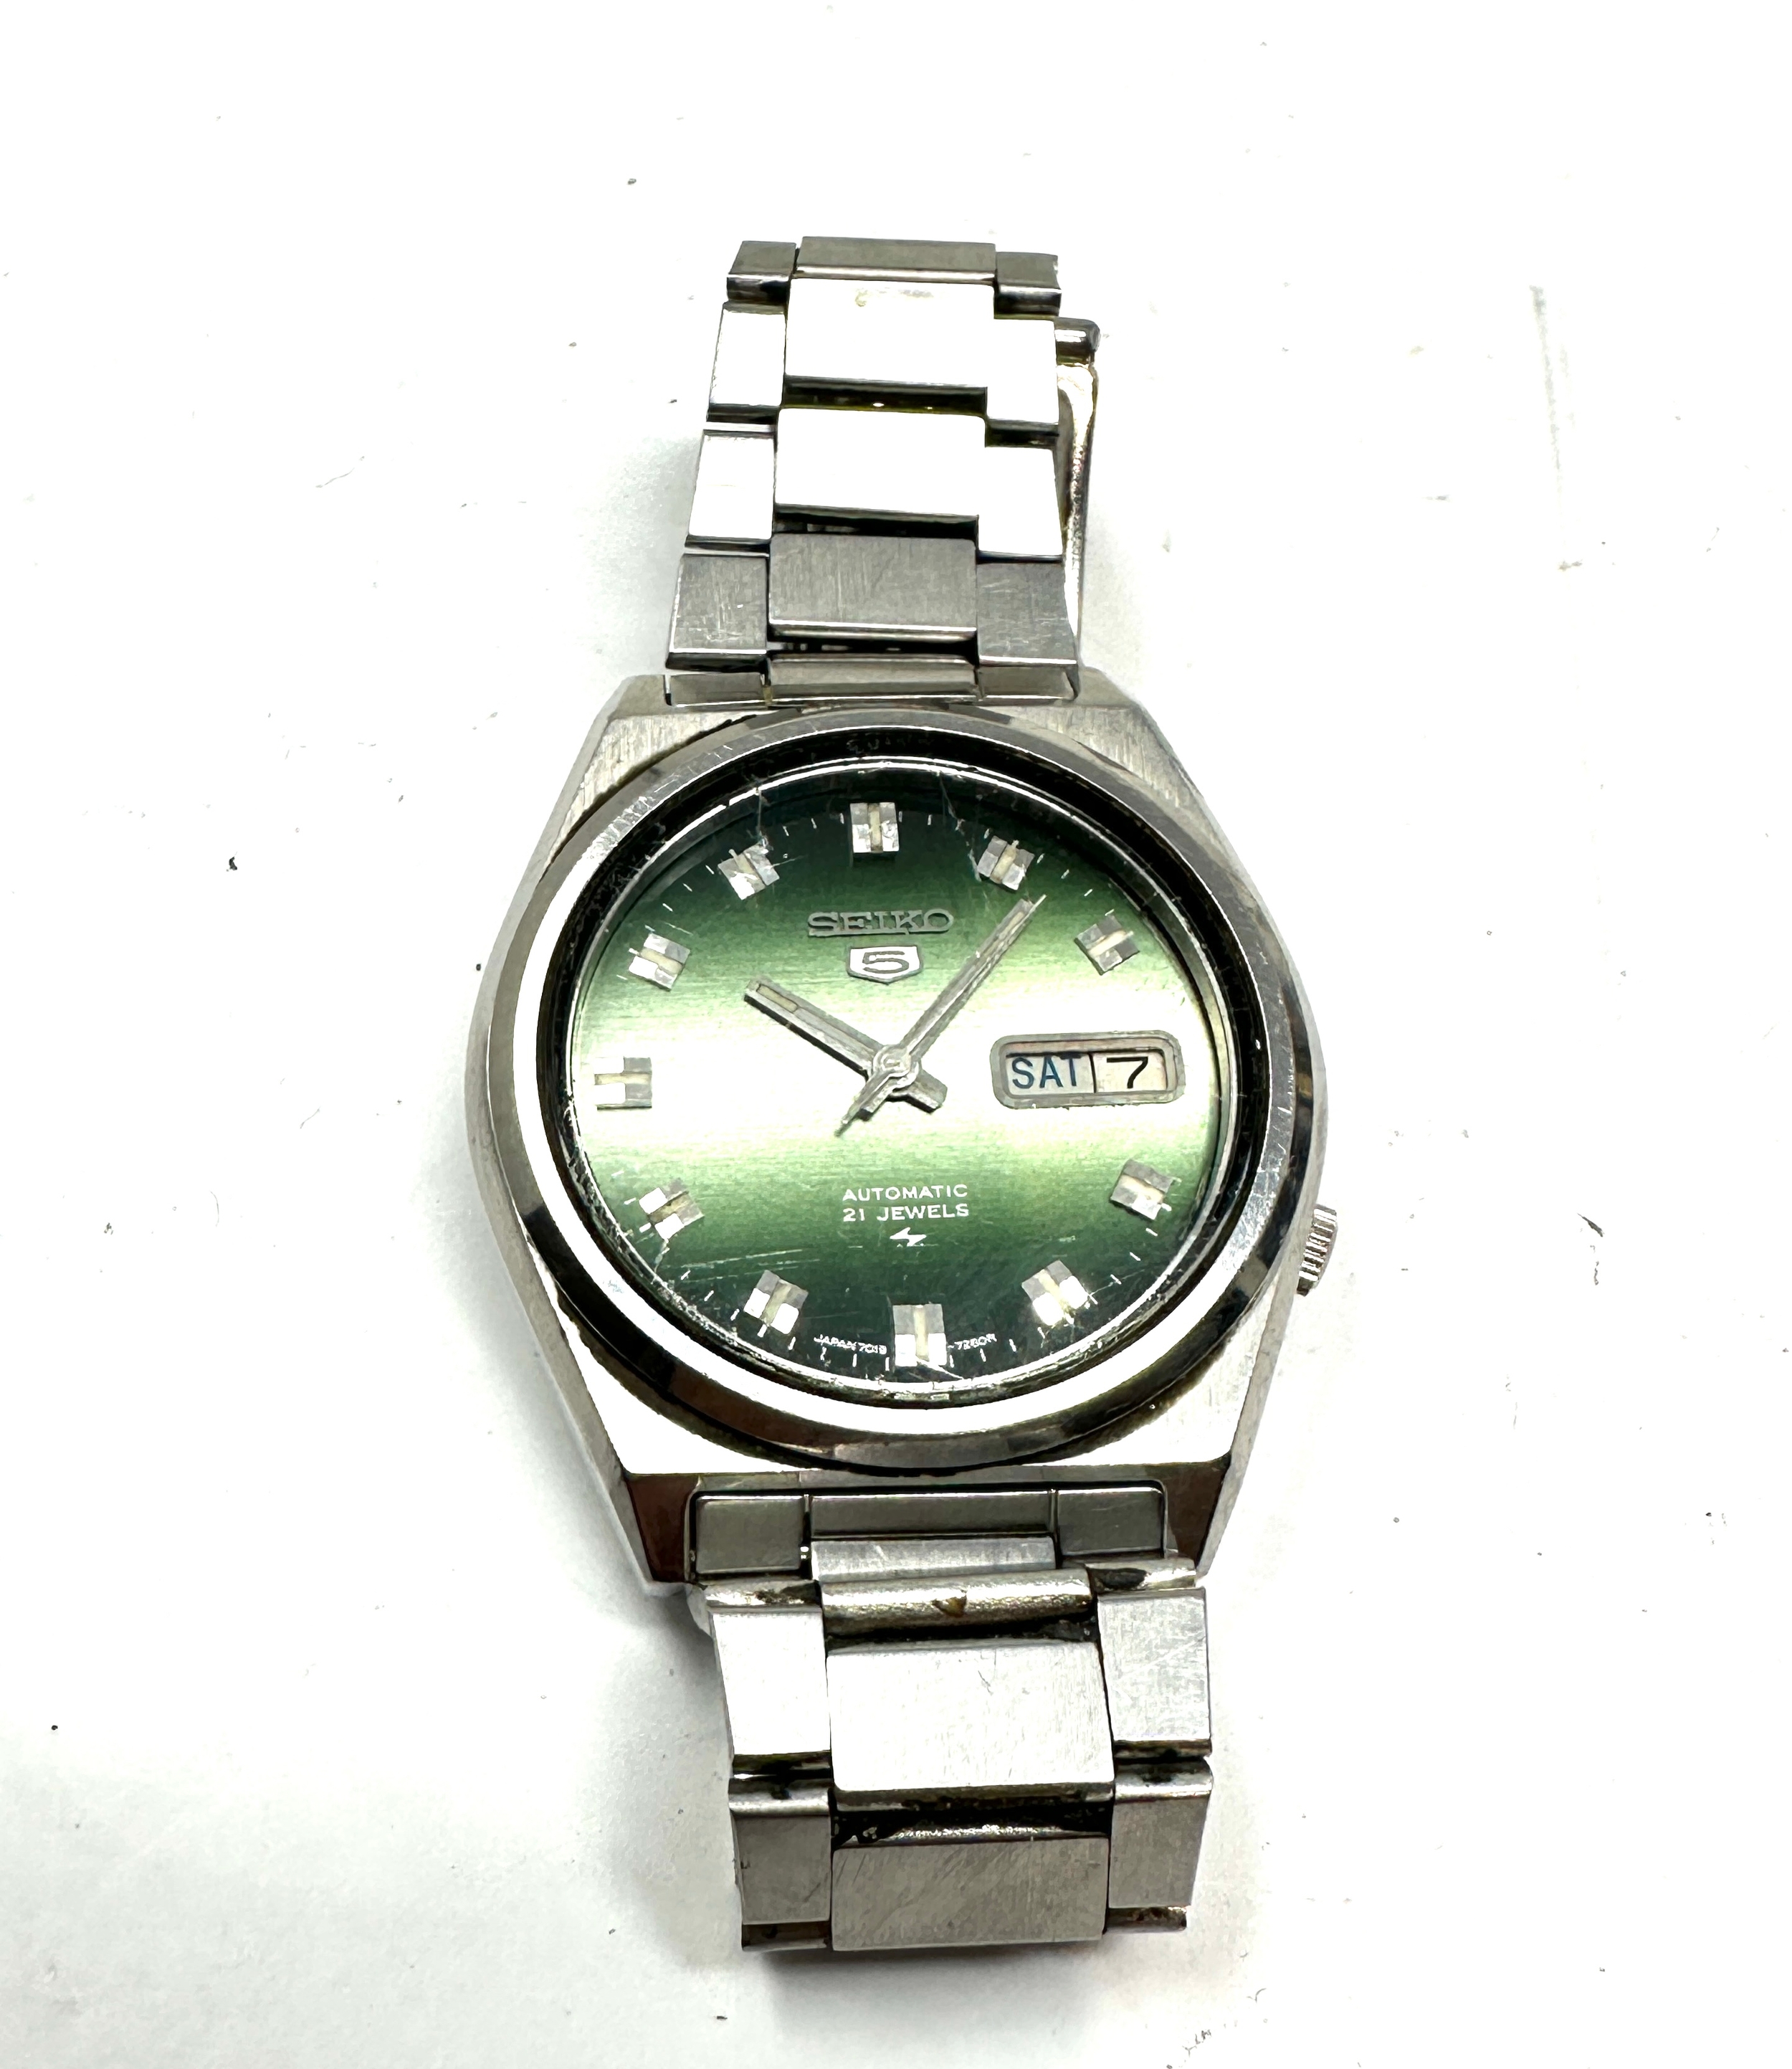 Vintage seiko 5 automatic day date gents wristwatch 7009-876a the watch is ticking